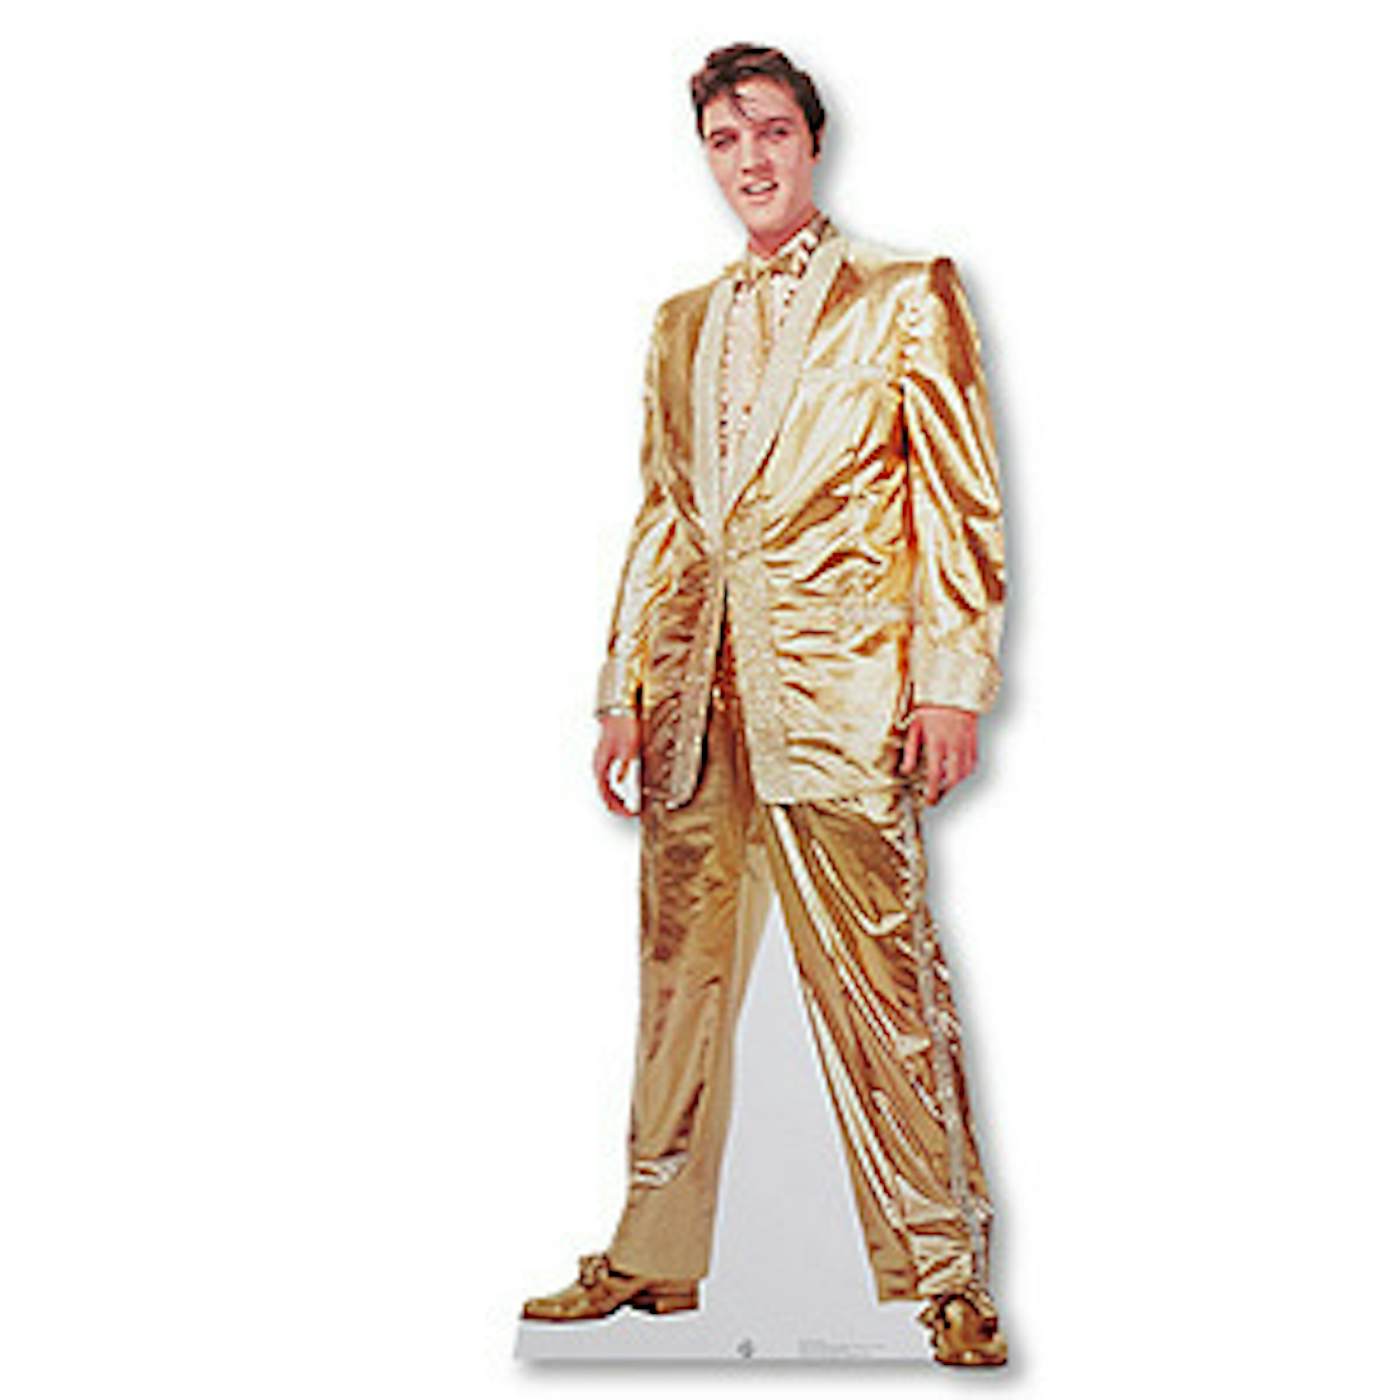 Elvis Presley in Gold Lifesize Stand-up